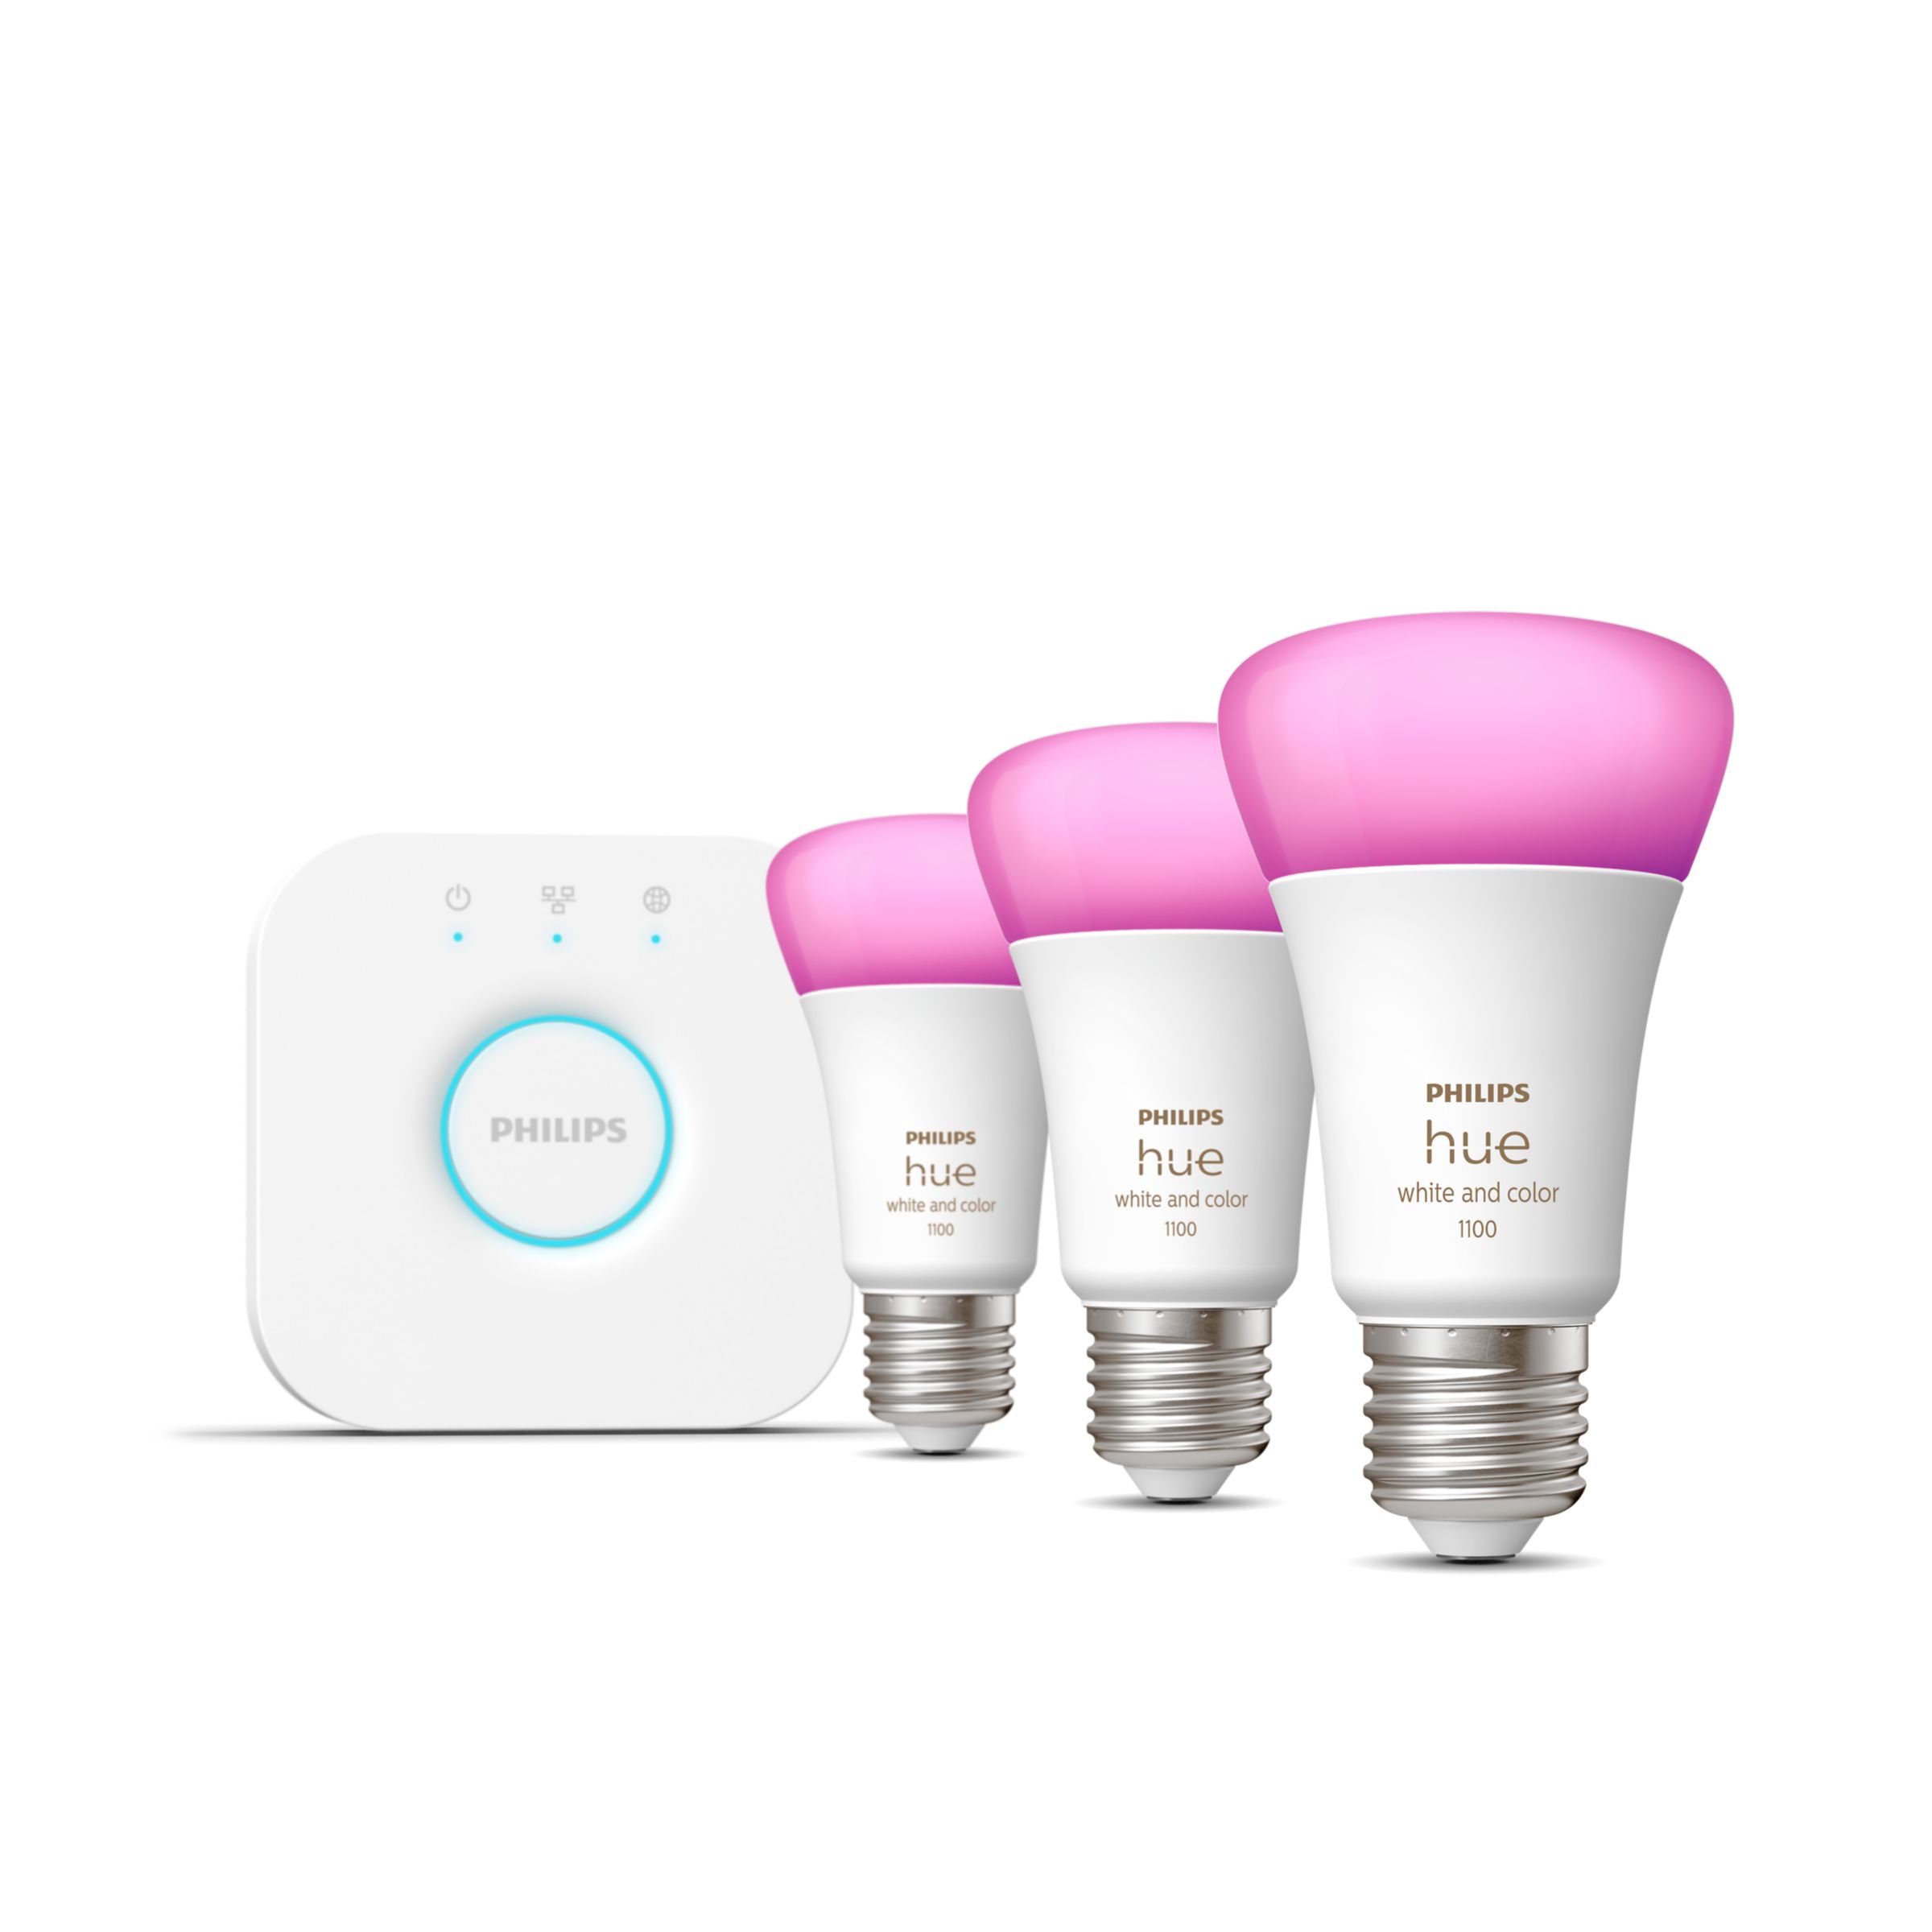 https://www.assets.signify.com/is/image/PhilipsLighting/8719514291515-929002468811-Philips-Hue_WCA-9W-A60-E27-3set-EUR-PMO-RTP